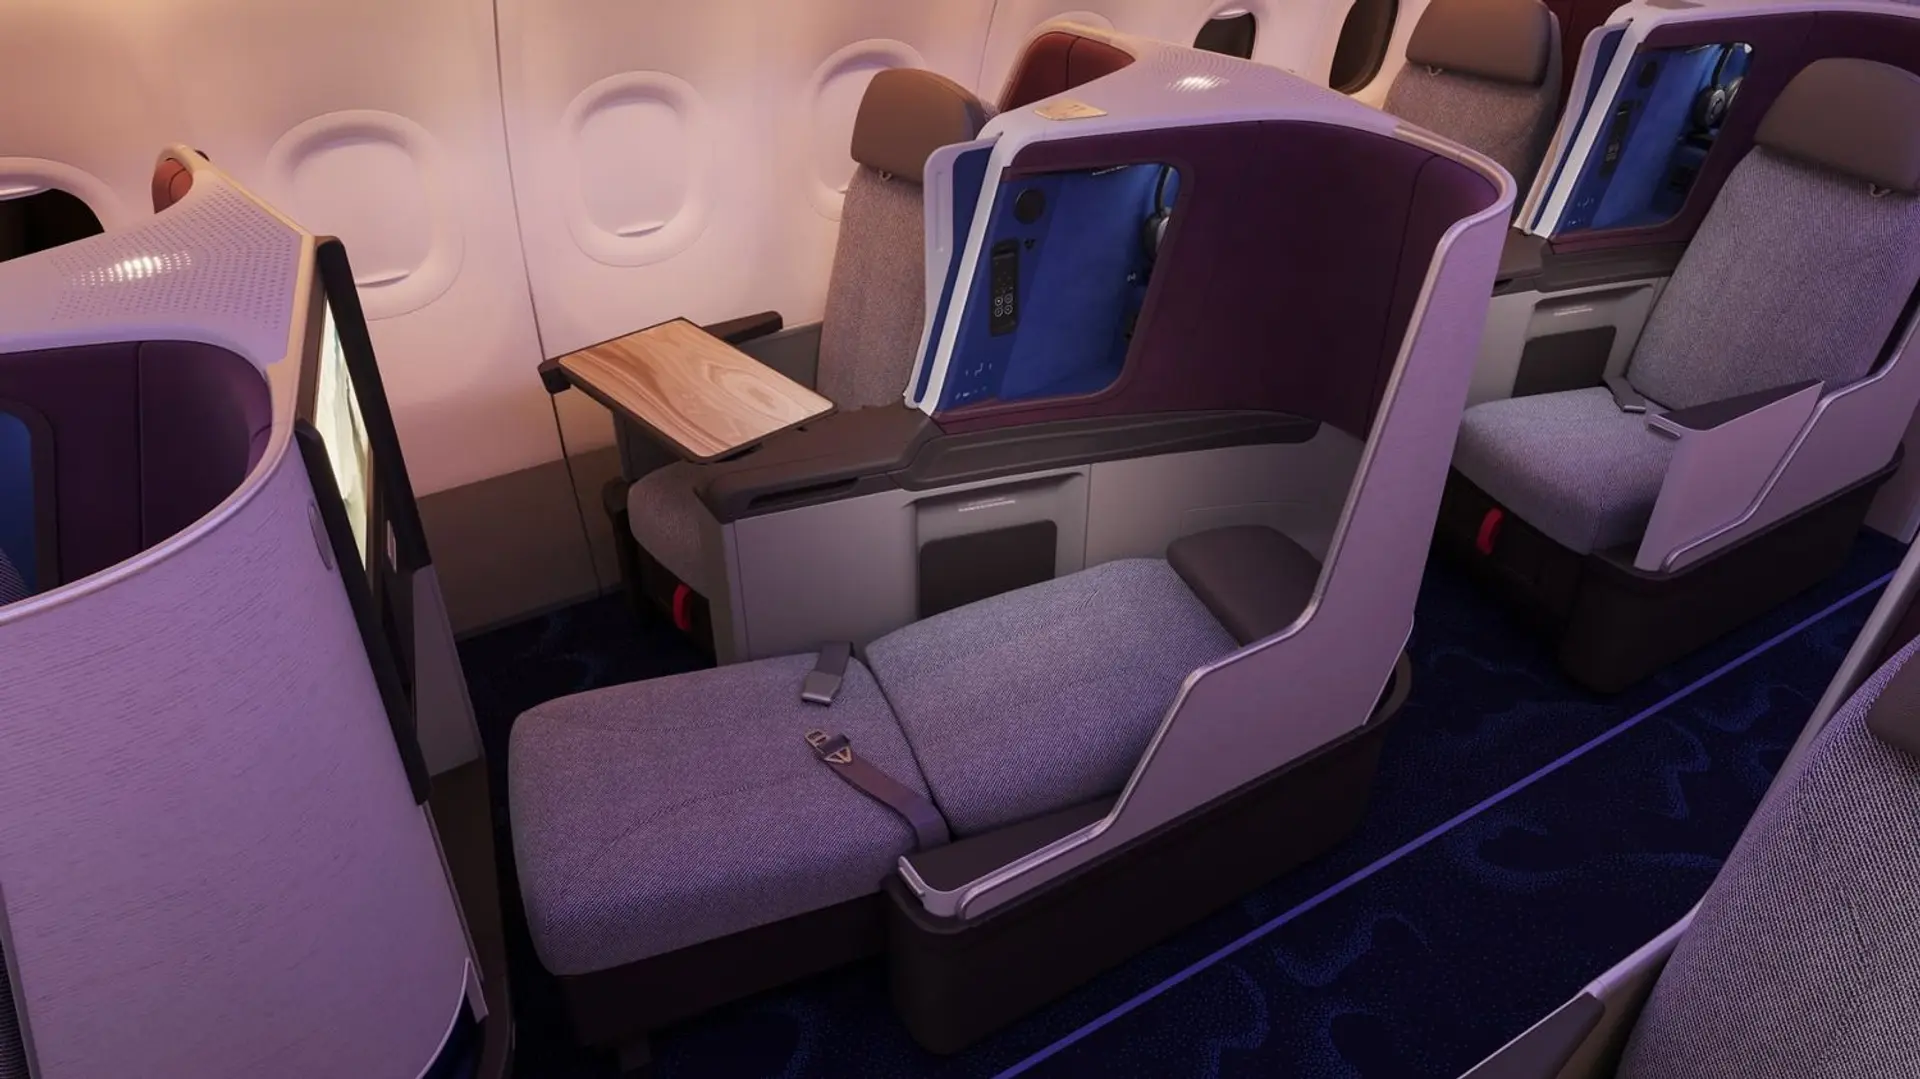 Airlines News - China Airlines unveils flatbeds in its new A321neo Business Class cabin